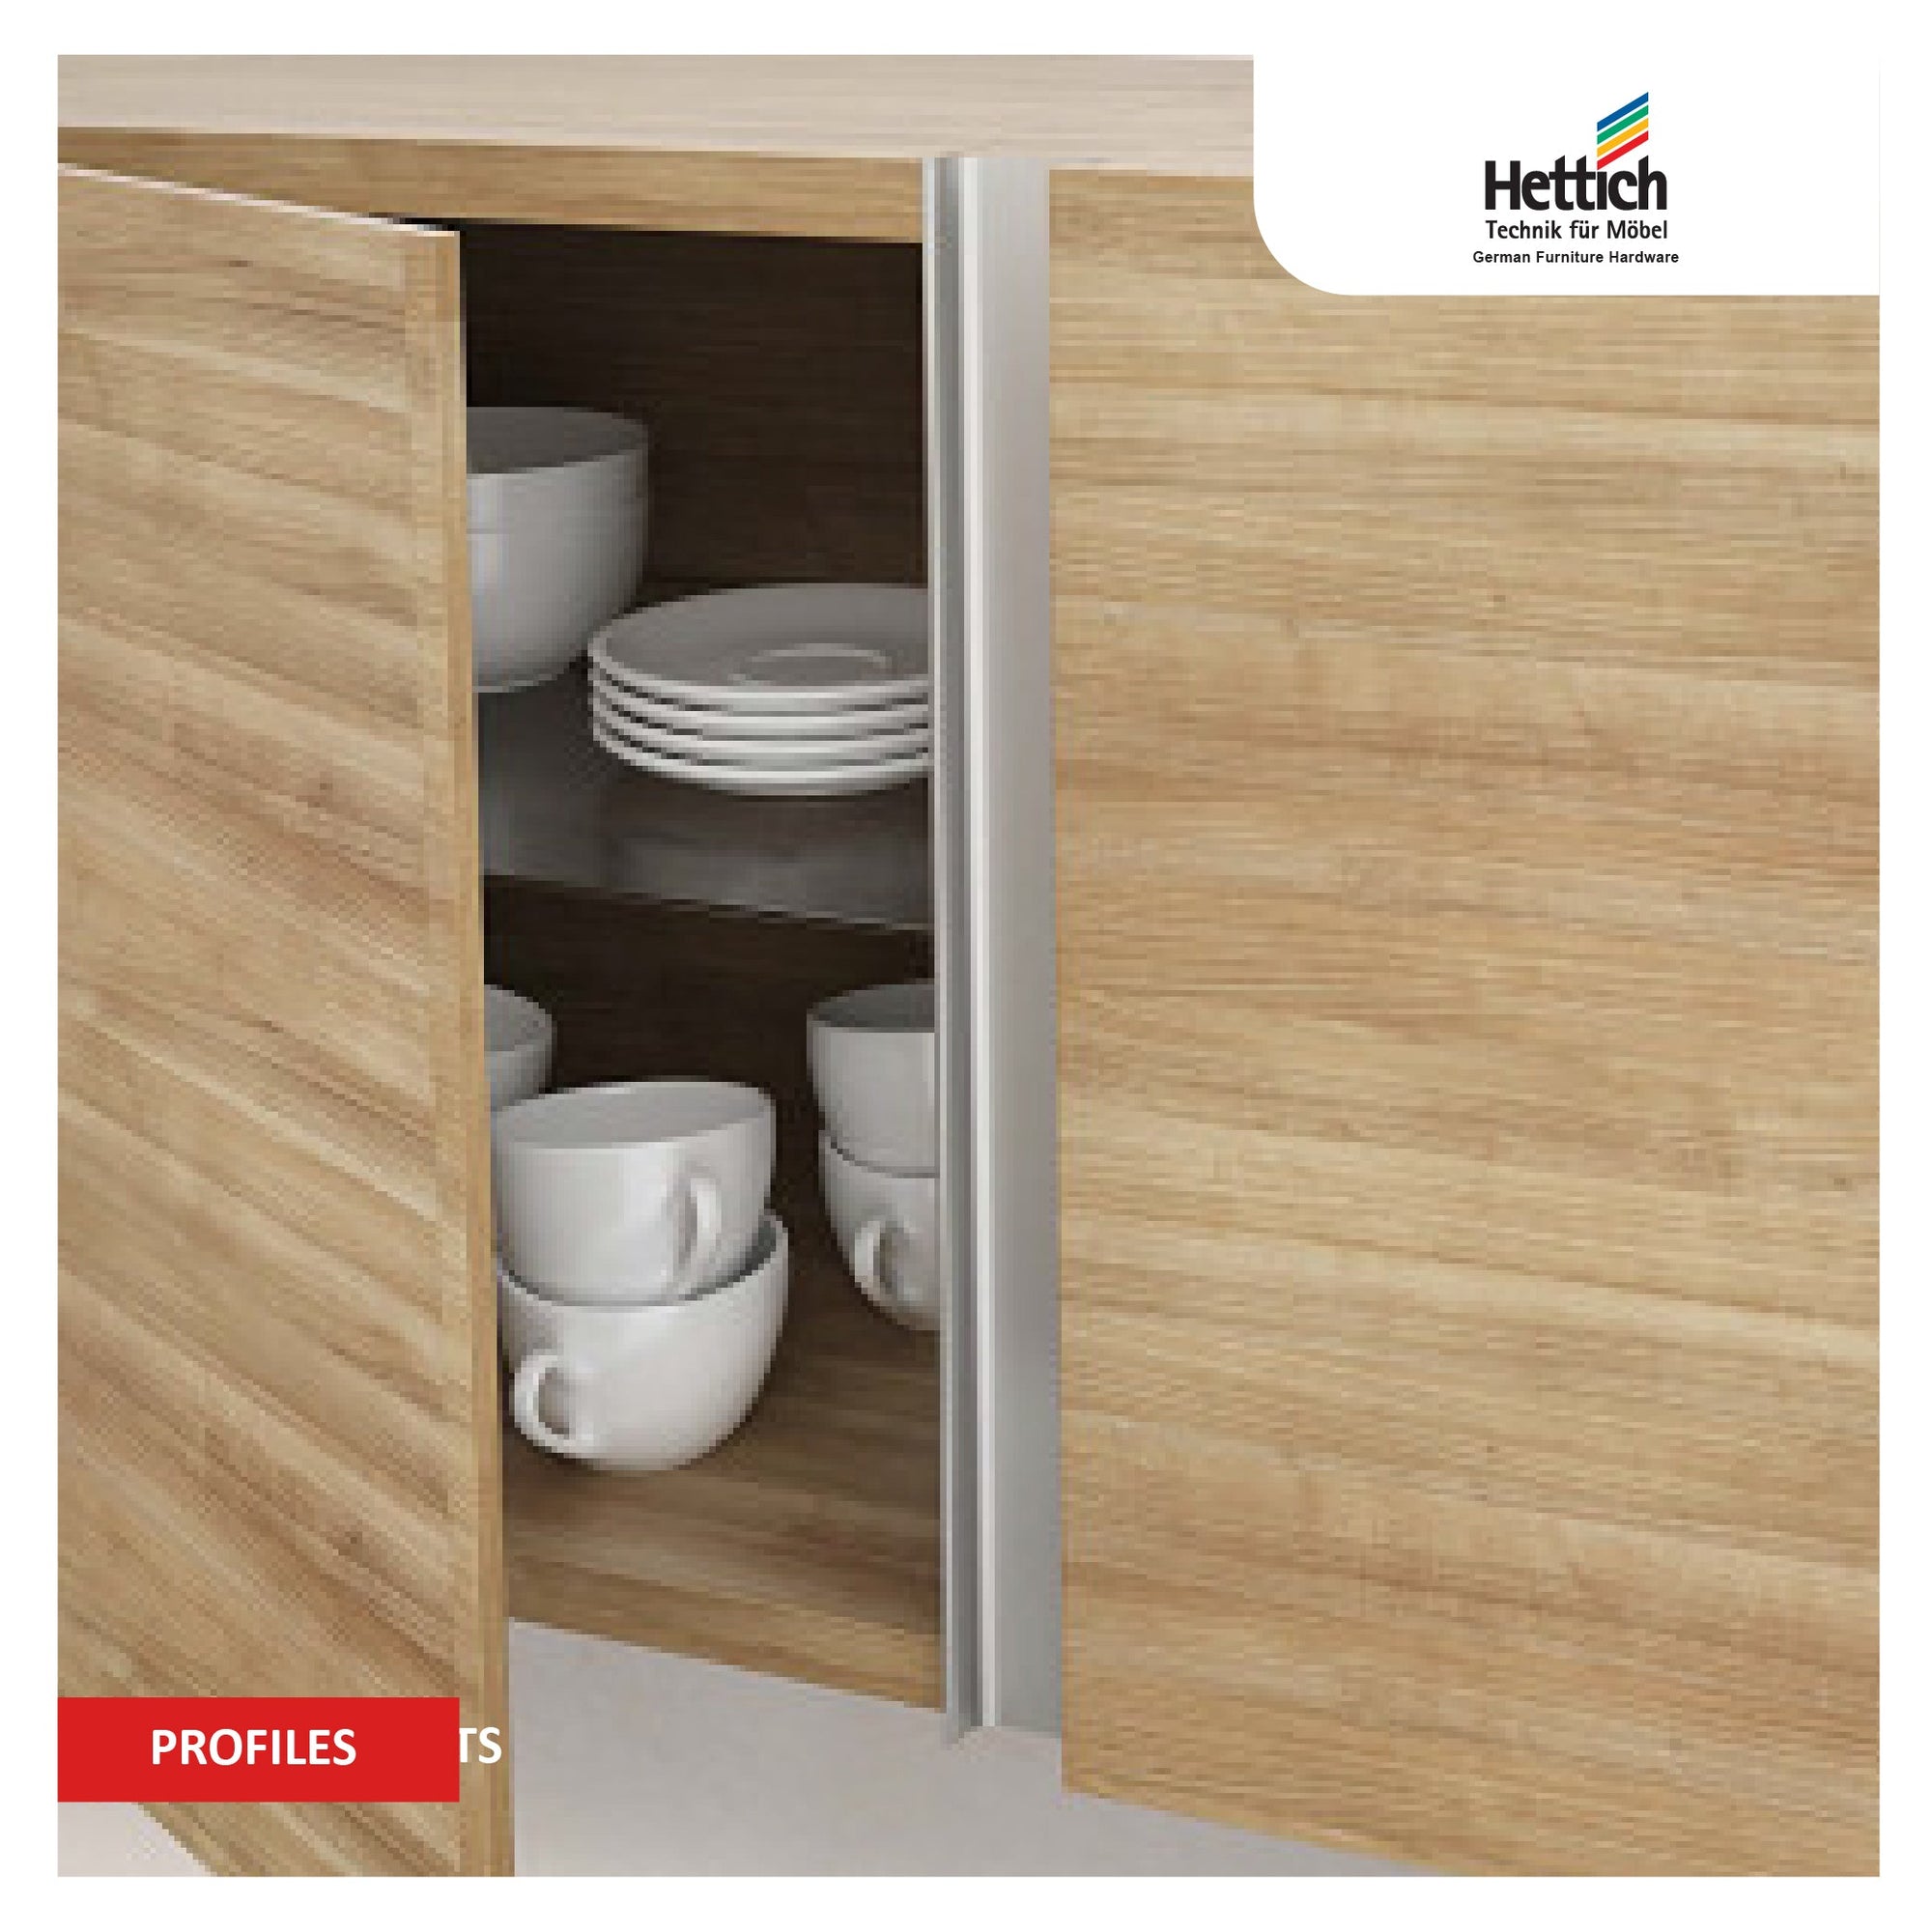 Hettich Profiles - Enhance your furniture with sleek and versatile profile systems for a contemporary and seamless design.